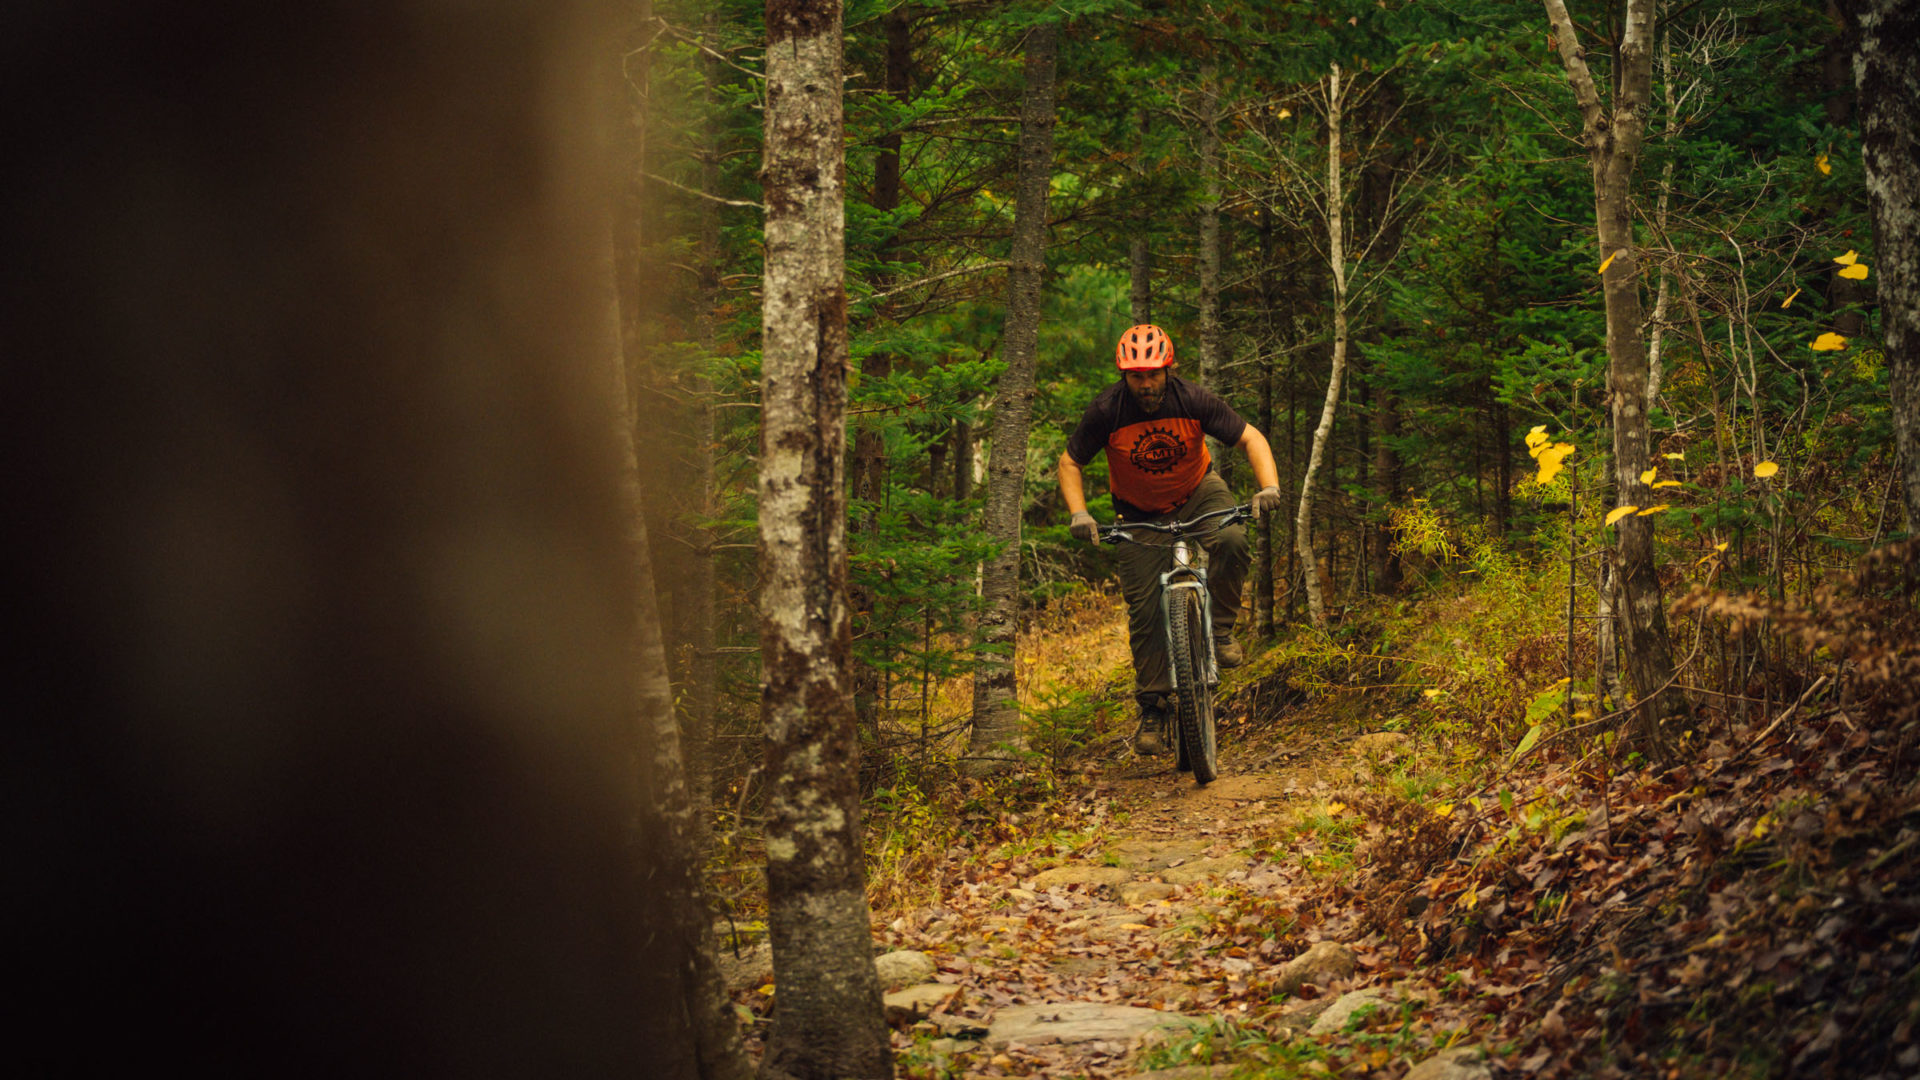 River Ridge Common Mountain Bike Trails in New Germany, NS